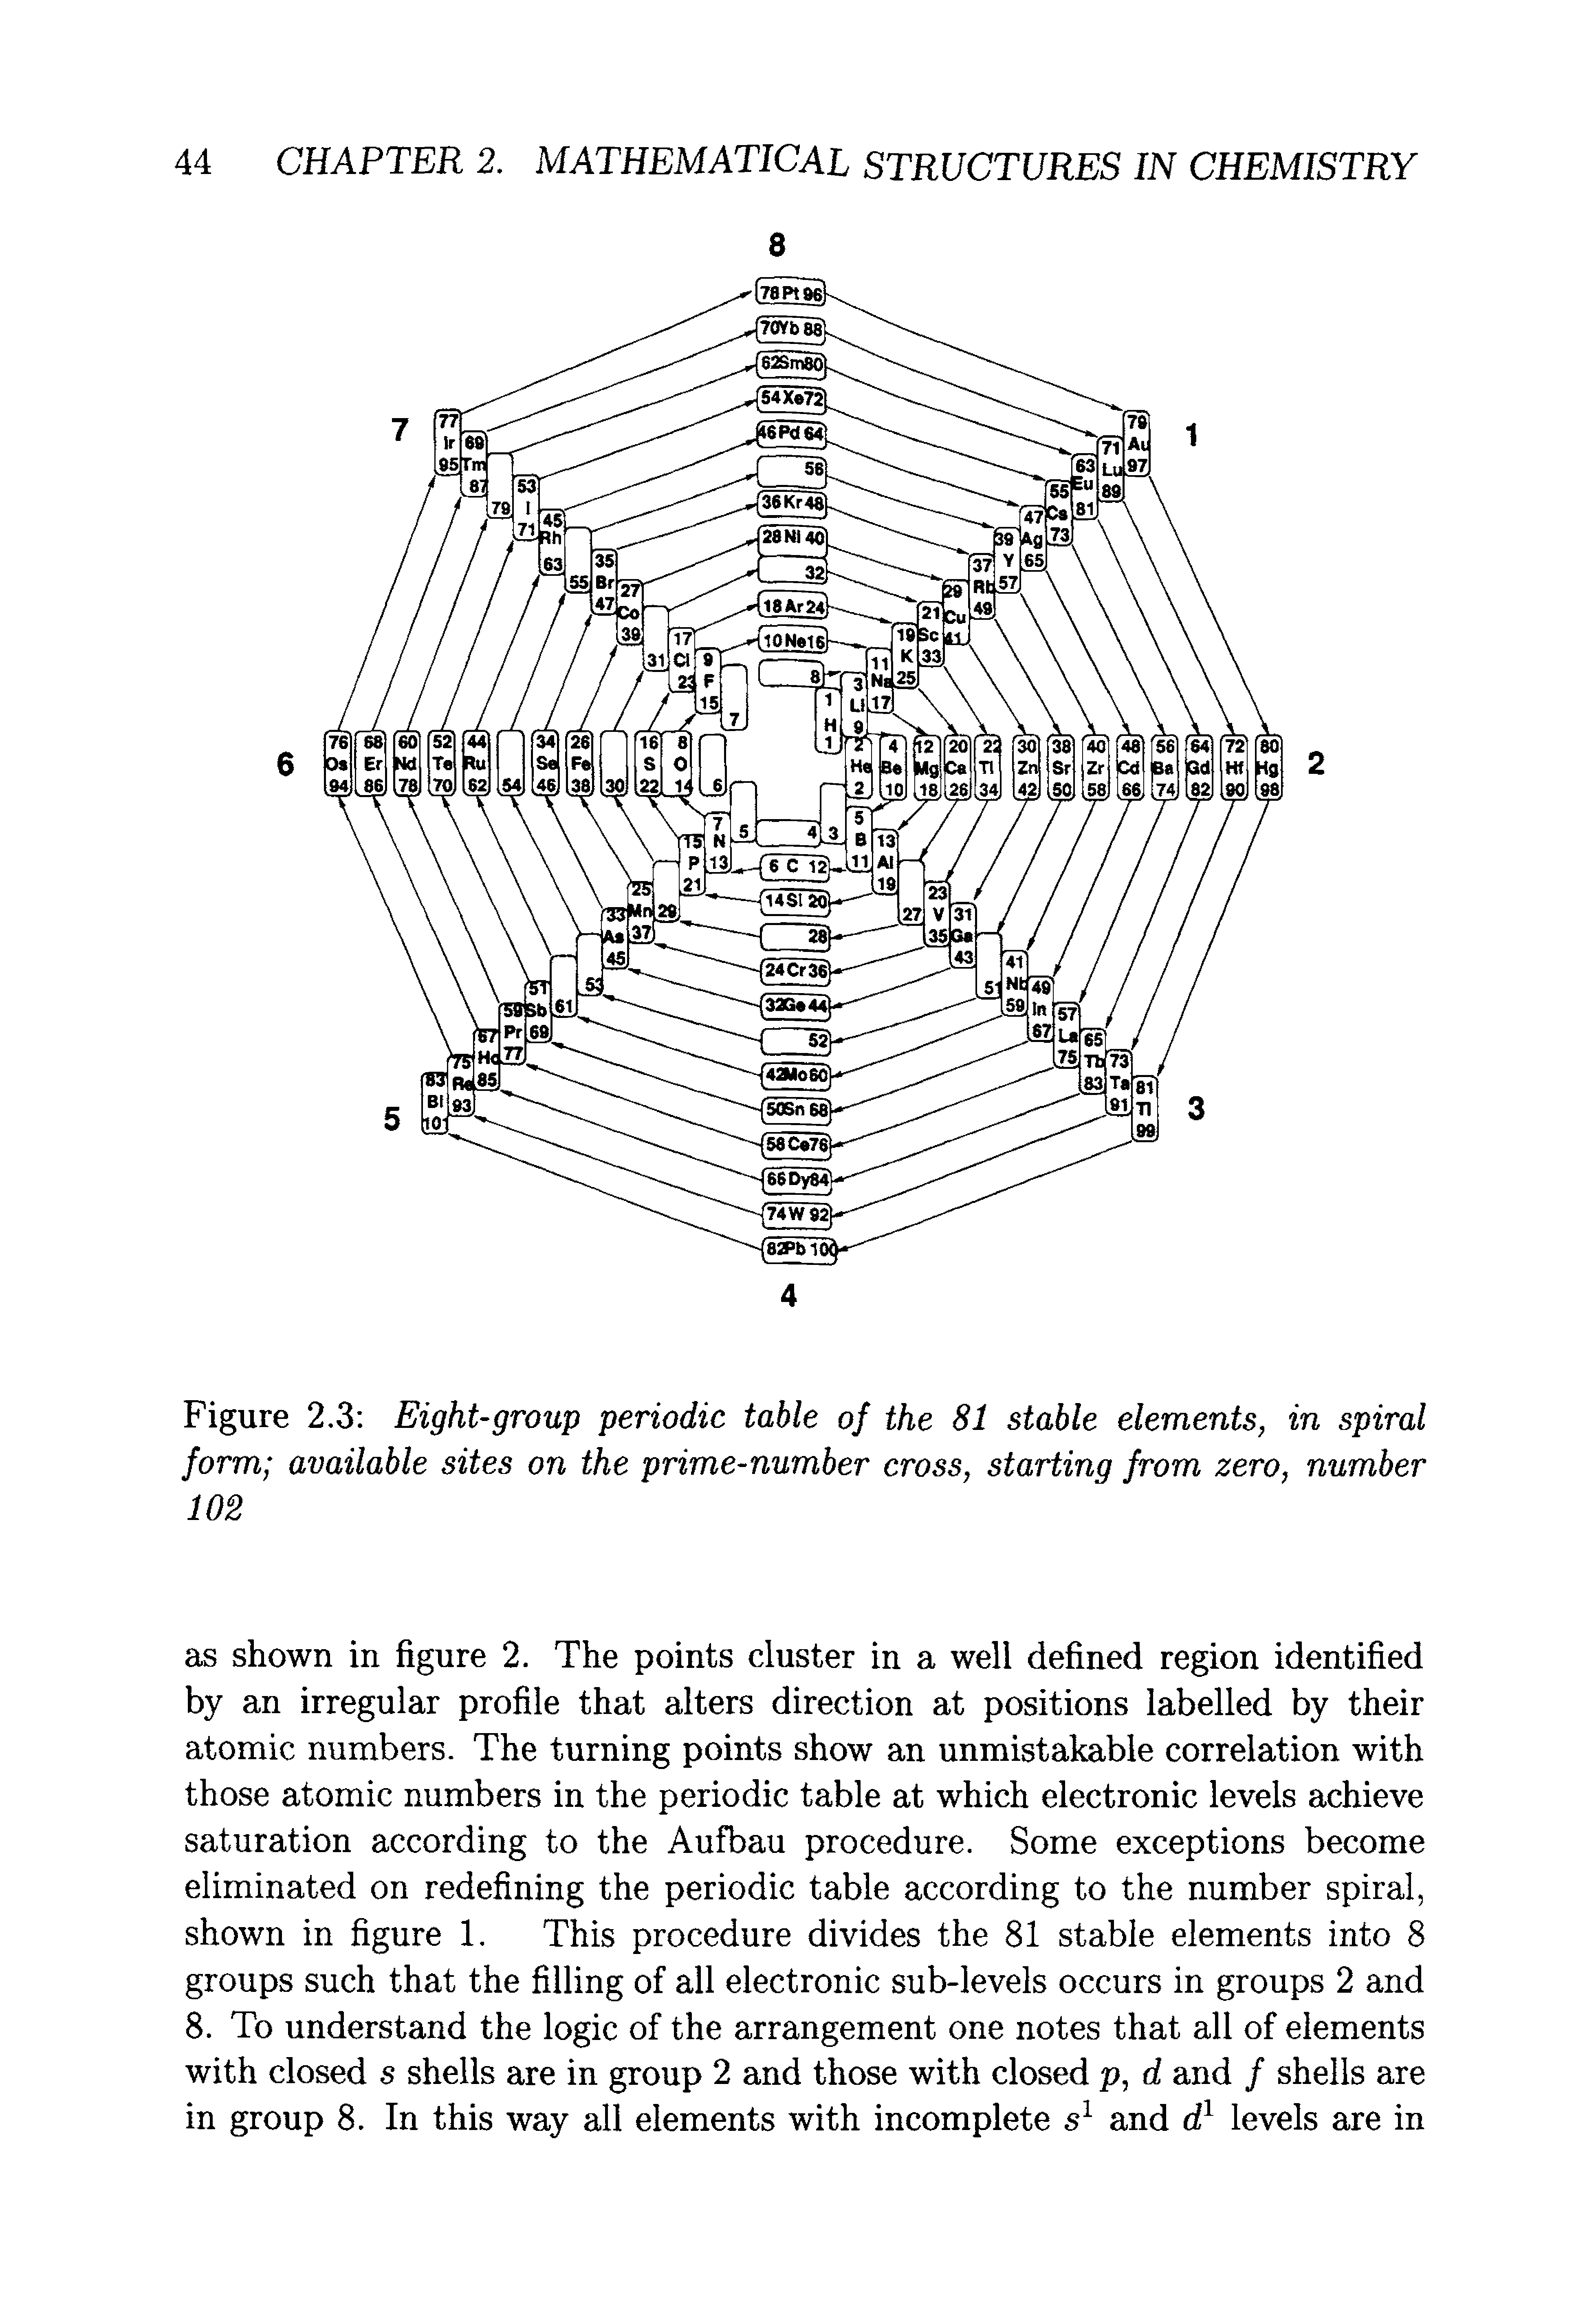 Figure 2.3 Eight-group periodic table of the 81 stable elements, in spiral form available sites on the prime-number cross, starting from zero, number...